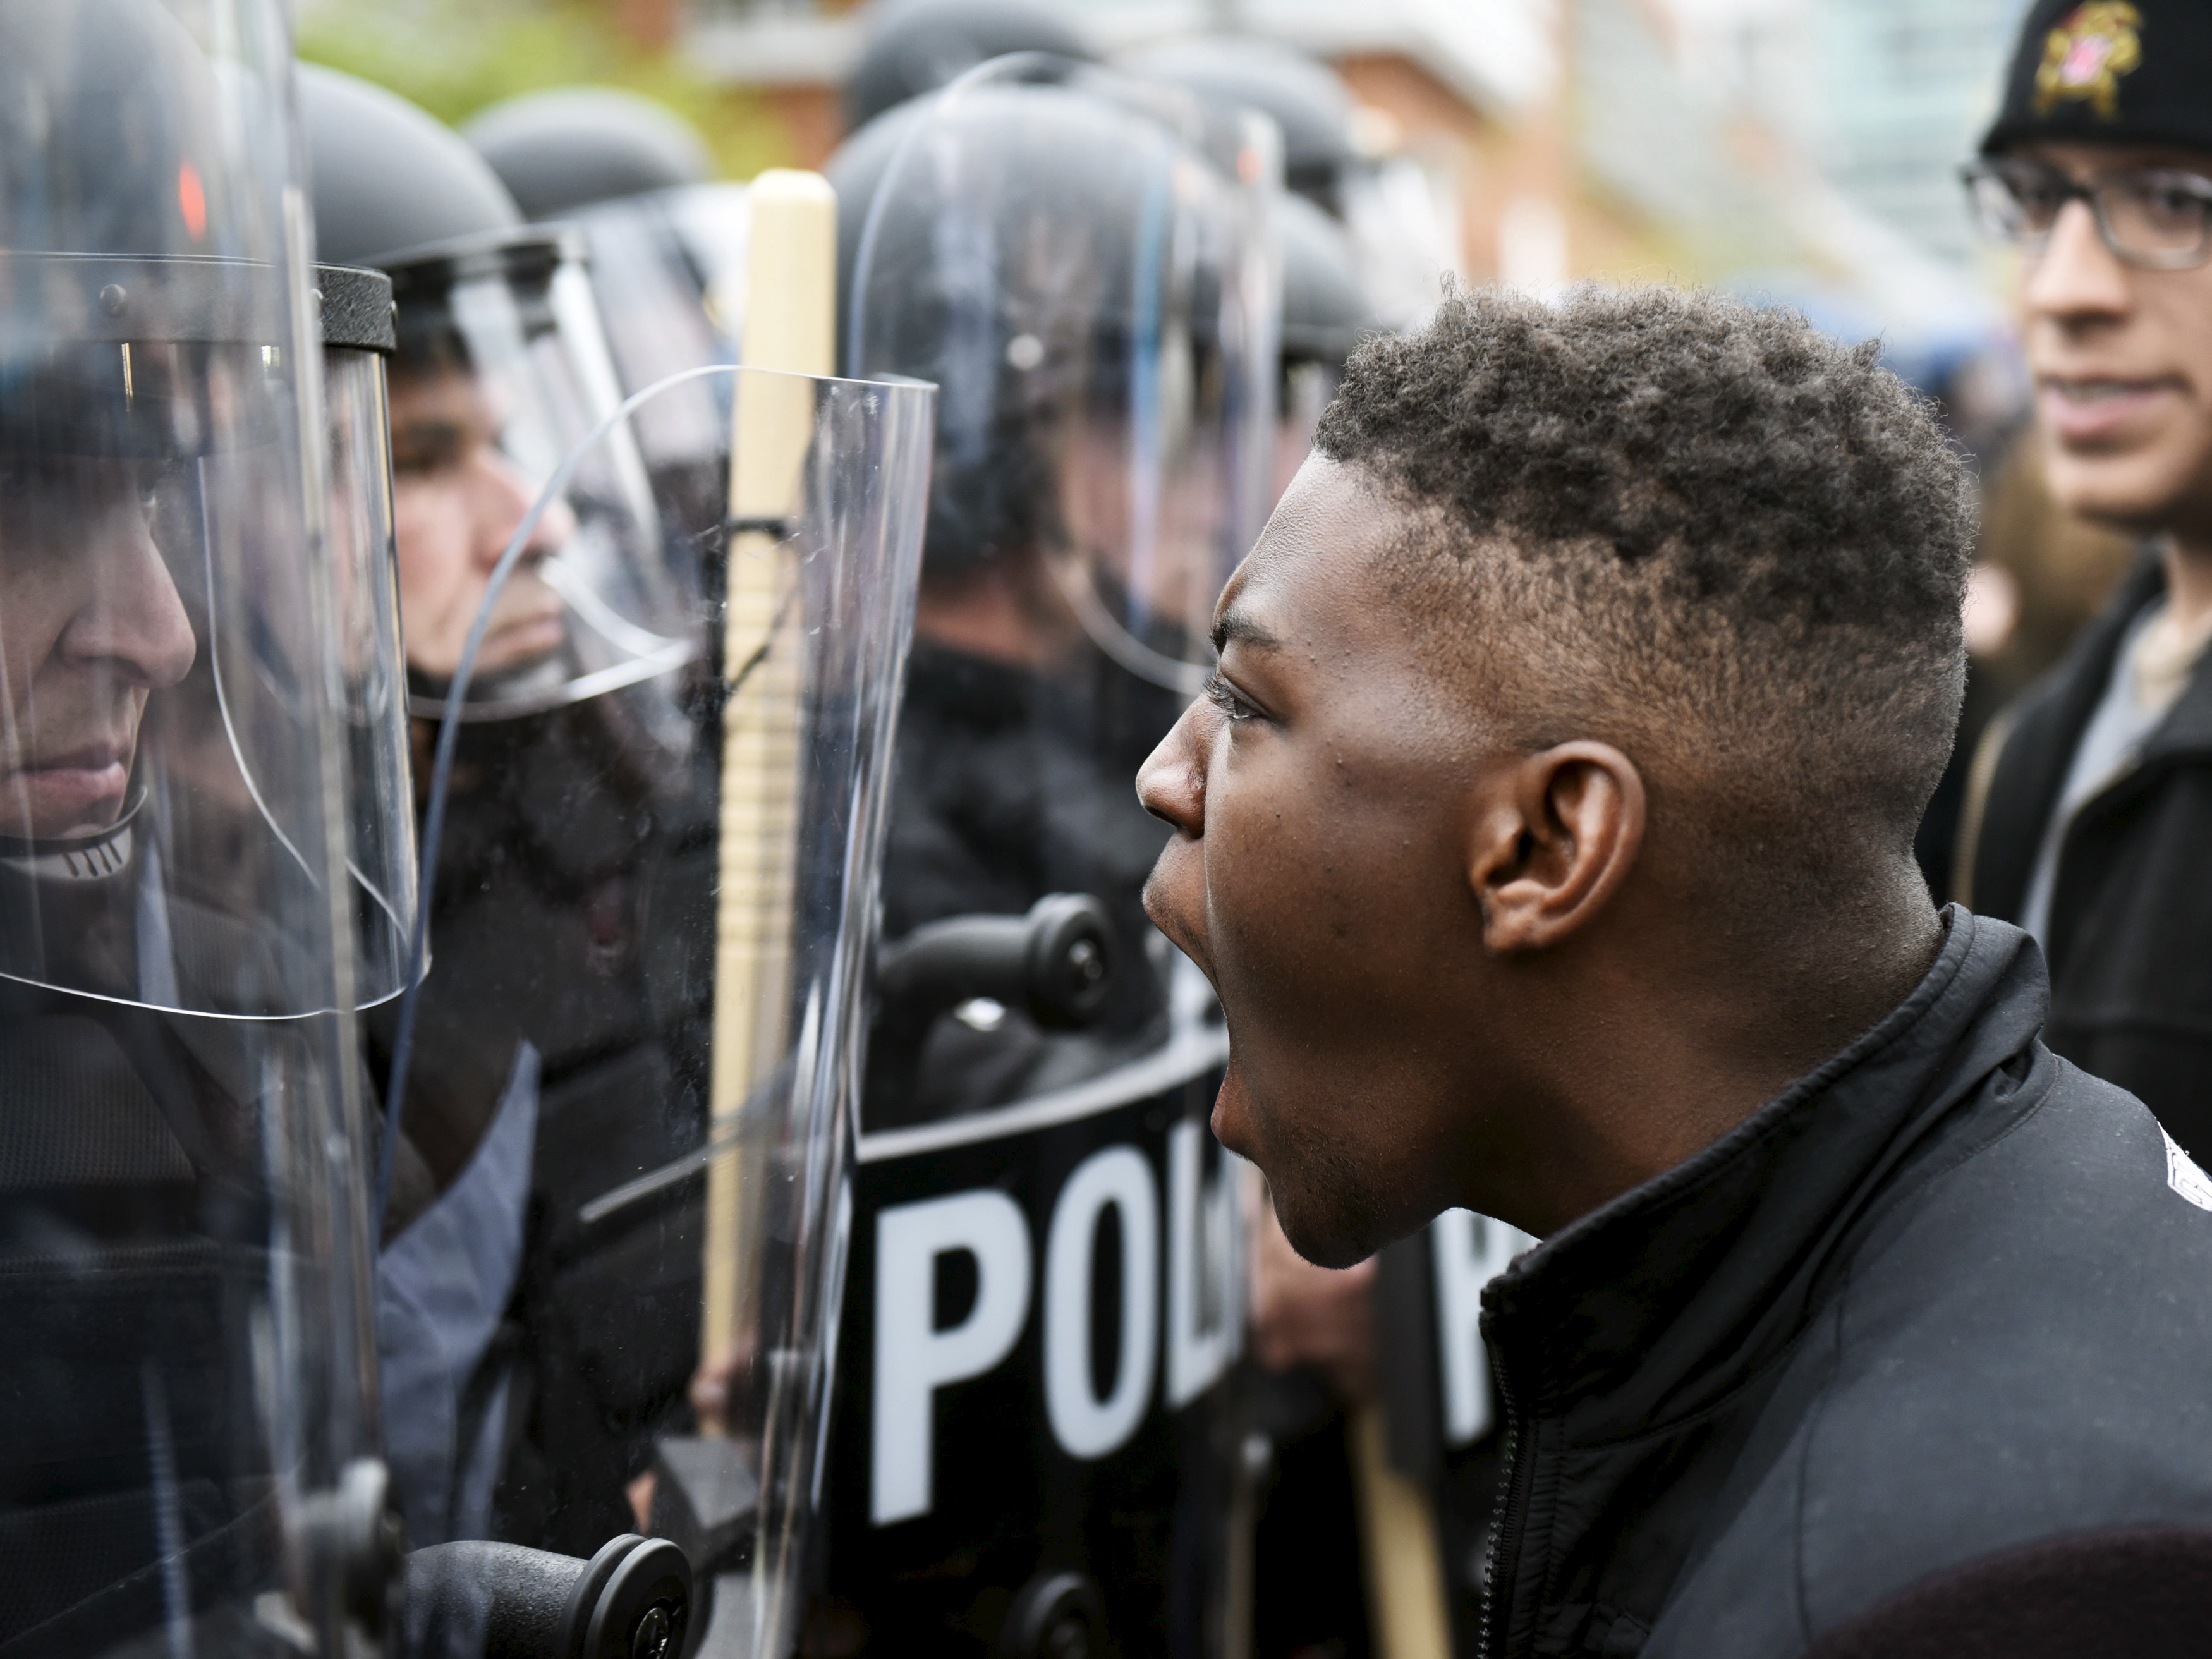 A demonstrator confronts police near Camden Yards during a protest against the death in police custody of Freddie Gray in Baltimore